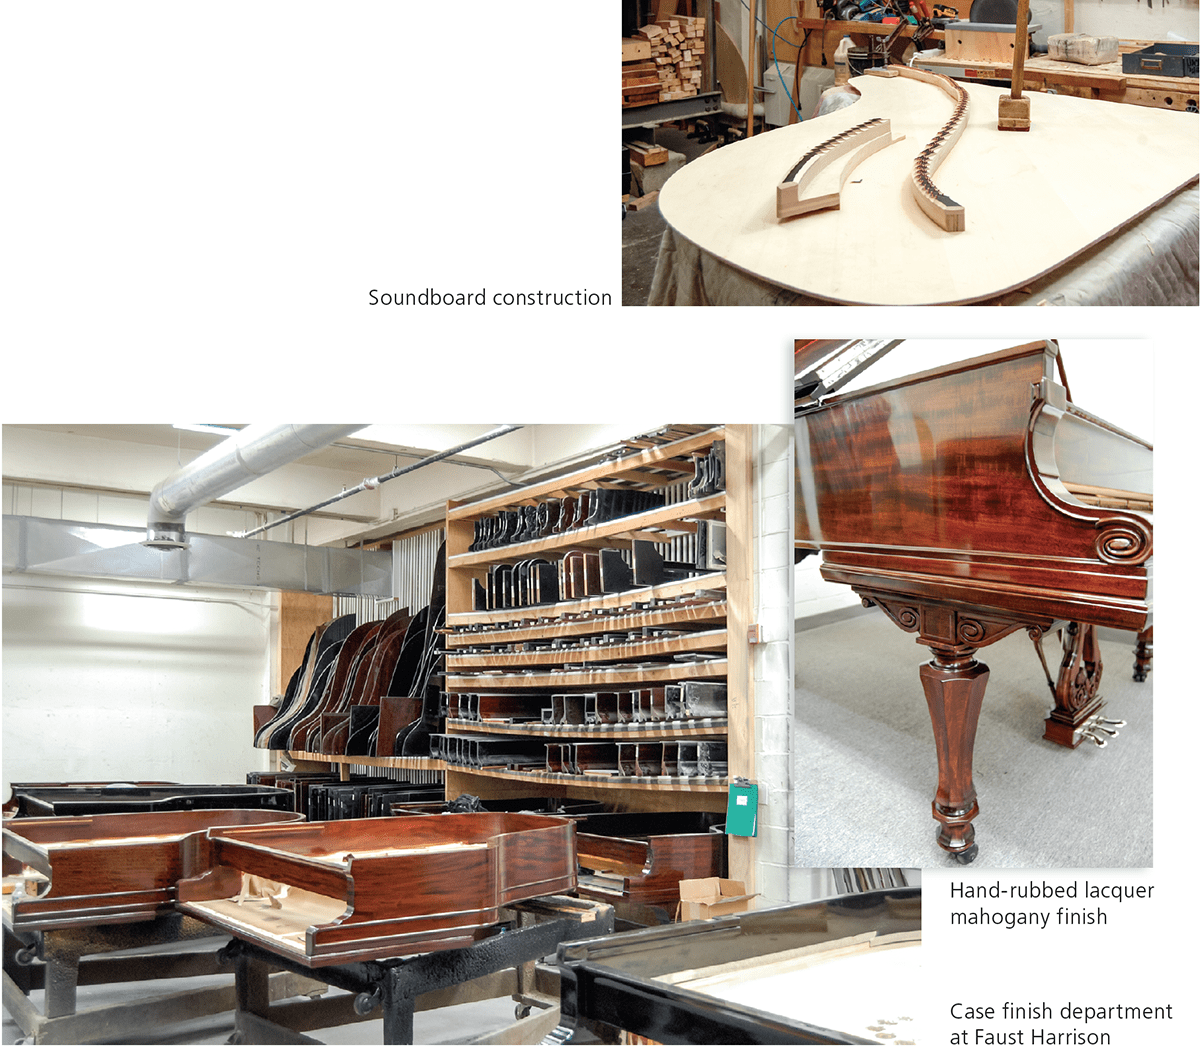 Soundboard construction. Hand-rubbed lacquer mahogany finish. Case finish department at Faust Harrison.